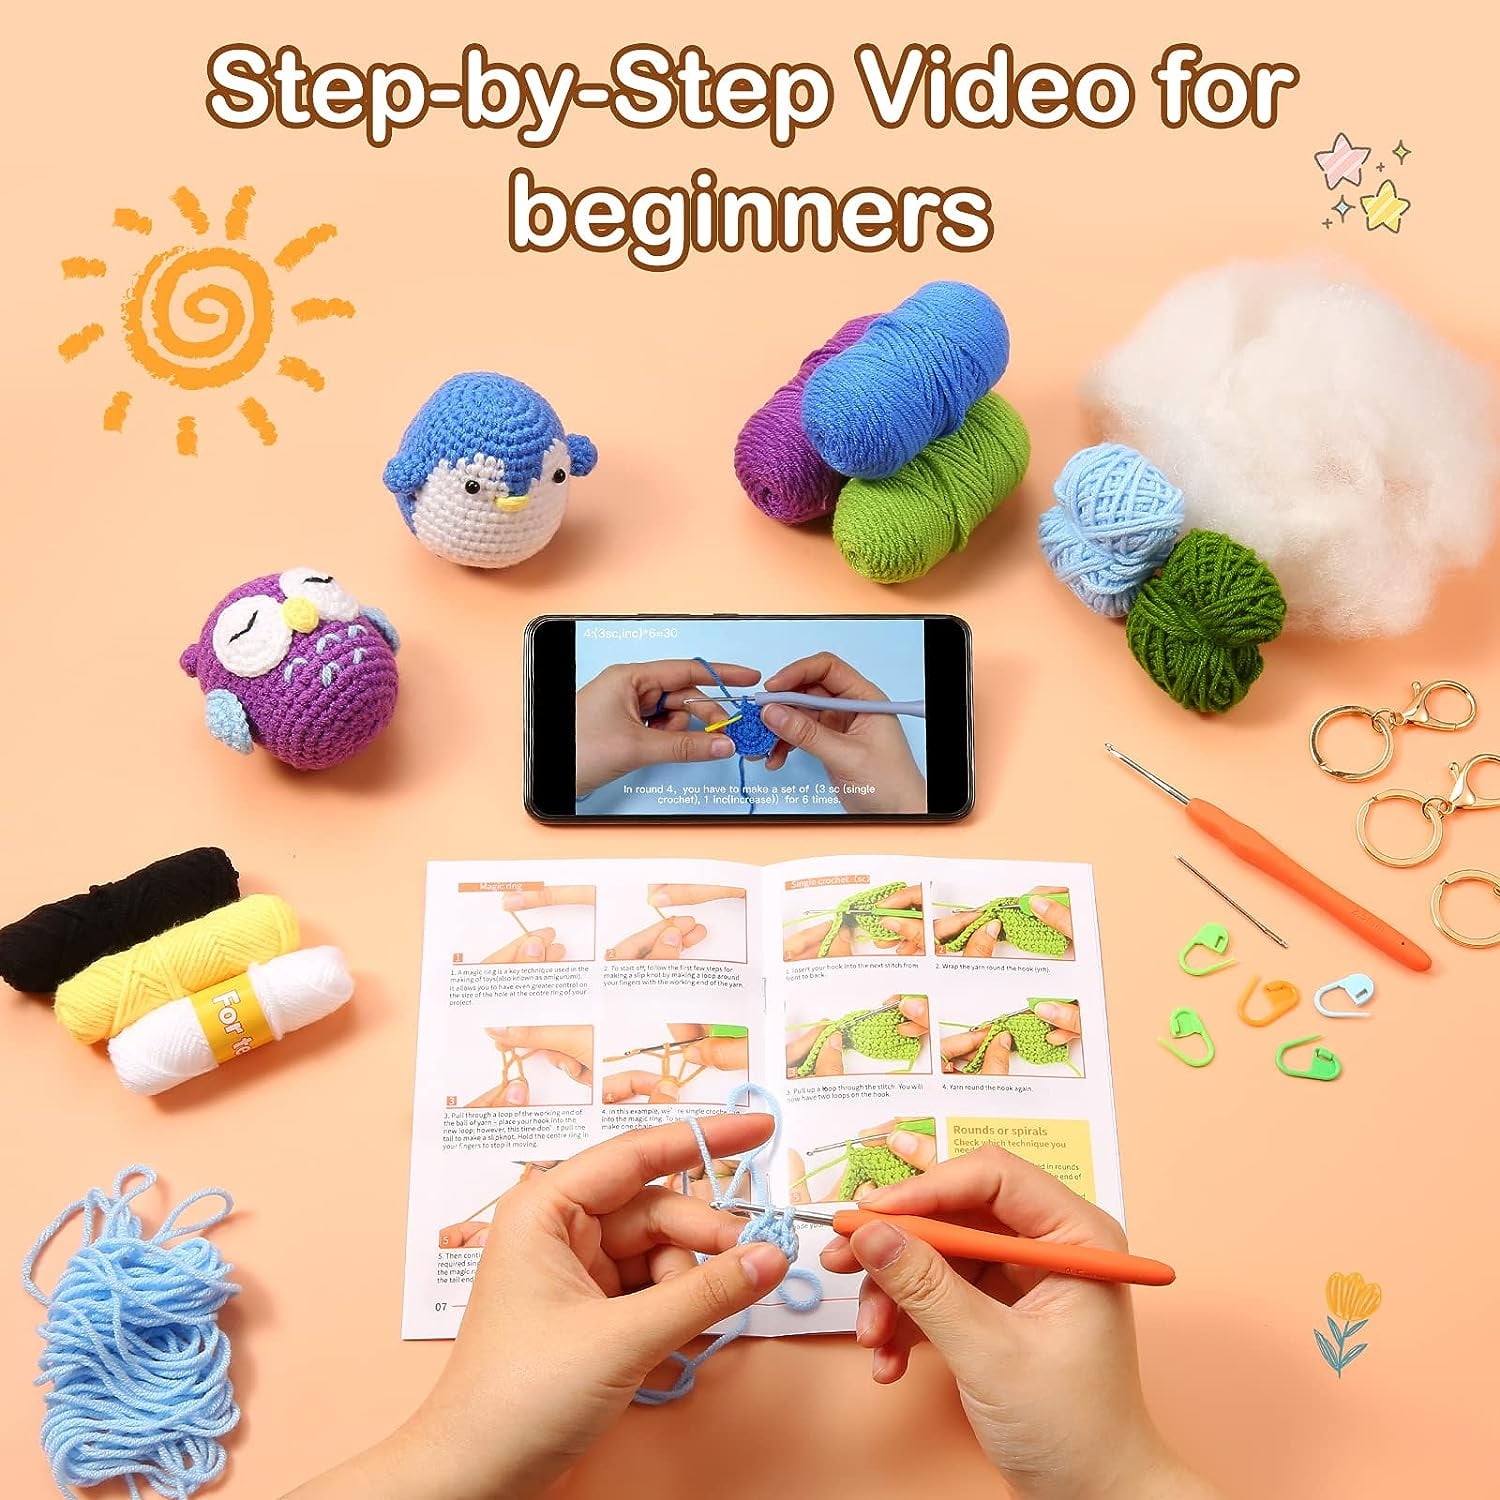  Xanadued Crochet Kit for Beginners - 3Pcs Crochet Cute Chicken  Starter Set, Knitting Kit for Beginners Adults, Easy Learn to Crochet Kit  with Tutorial and Step-by-Step Instruction Vedio